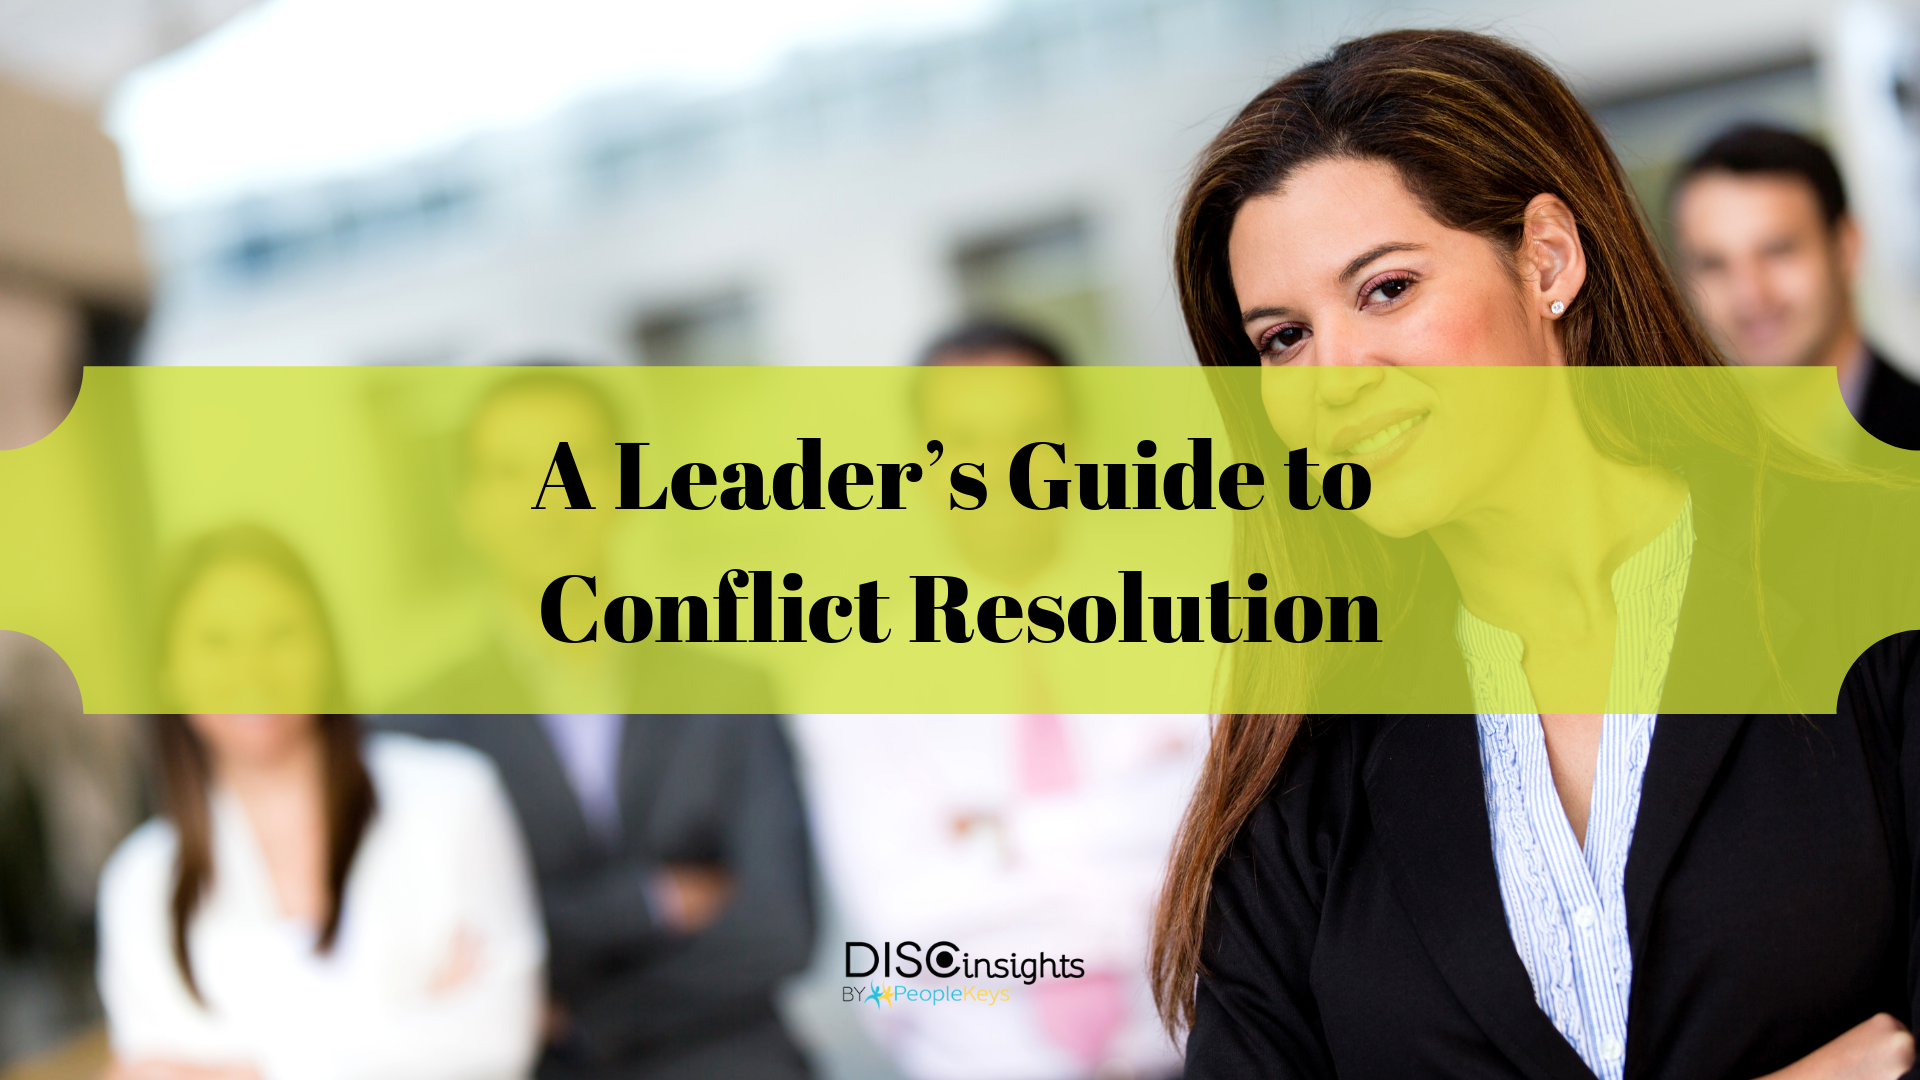 A Leader’s Guide to Conflict Resolution